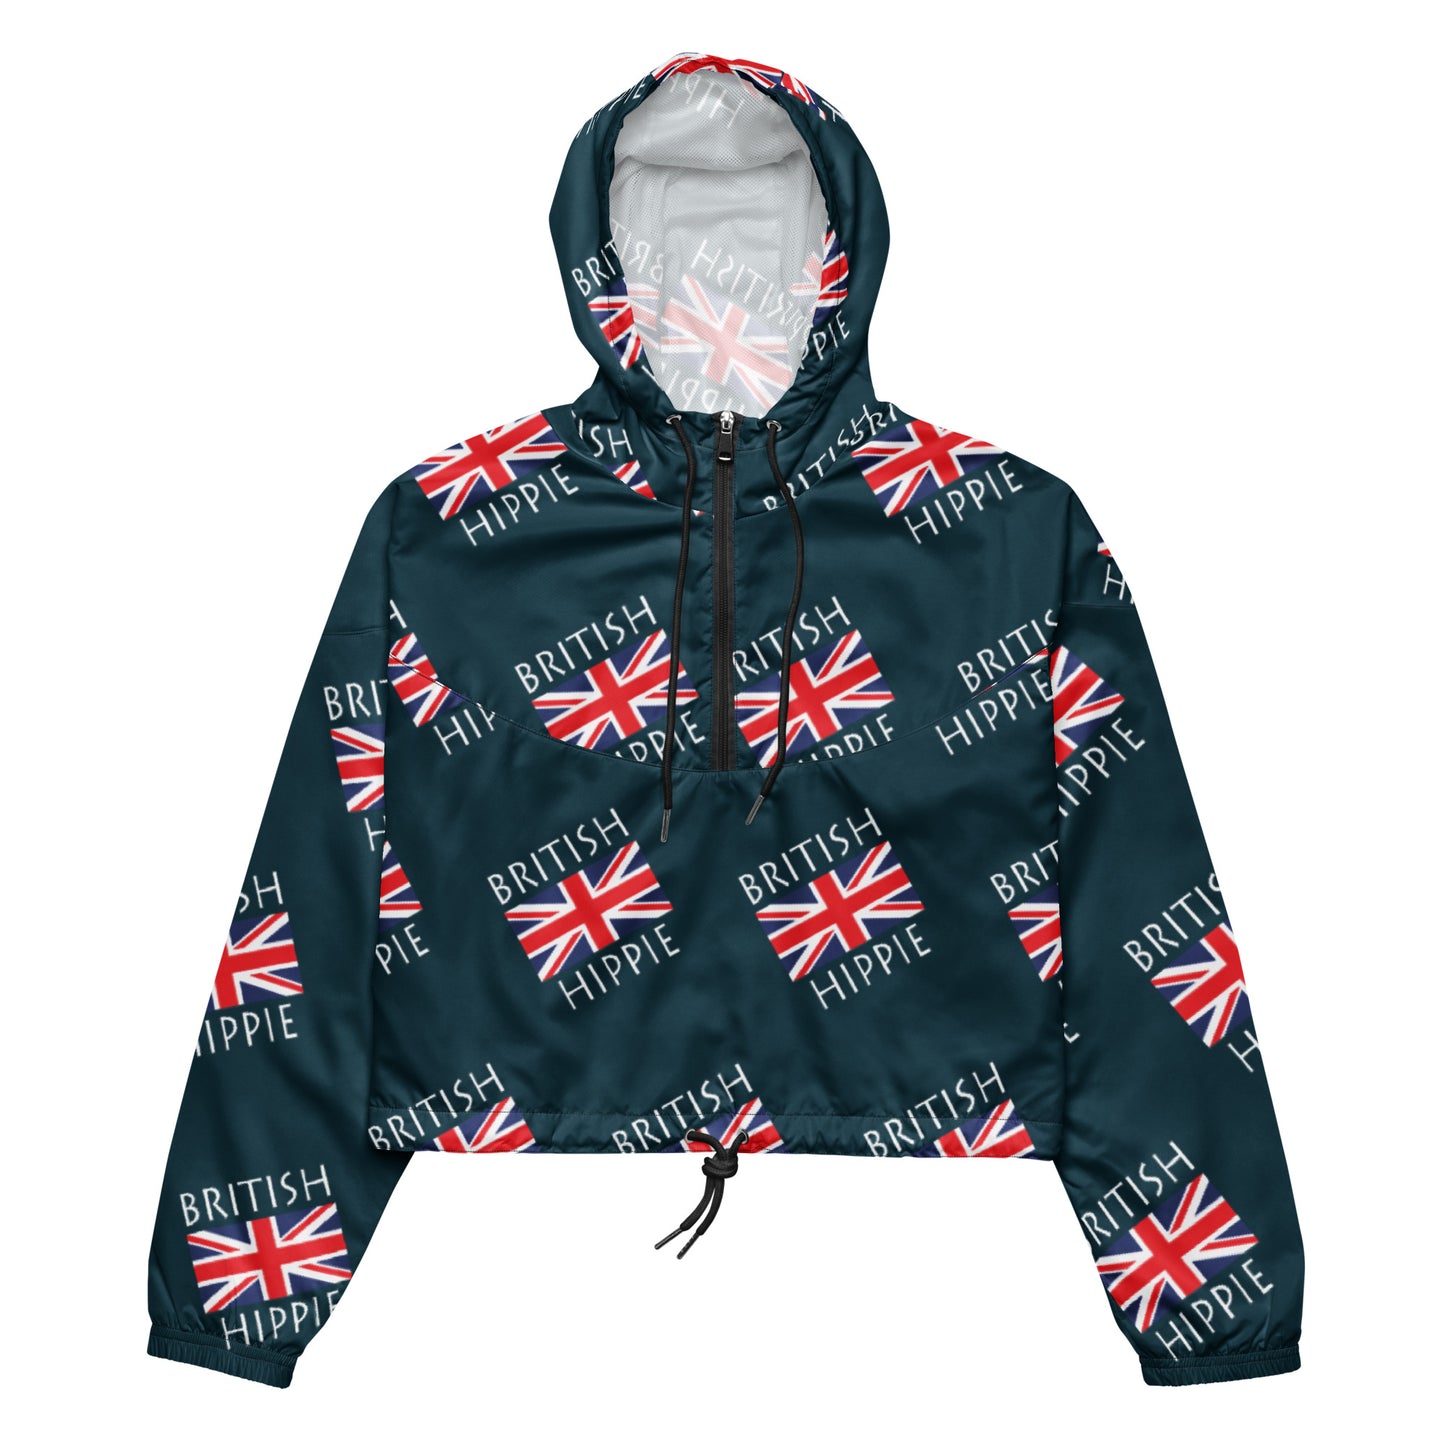 This British Flag Hippie™ stylish cropped half-zip windbreaker is a fashion statement! The repeating British Flag Hippie design is the coolest, hippest, trendiest piece in your wardrobe! Hike in style without the rain getting in the way...this cropped windbreaker is lightweight, waterproof, and suitable for every kind of adventure. Features include side-slit pockets, breathable mesh lining, and adjustable drawstrings on the hood and waist to support all your stylish outdoor looks.